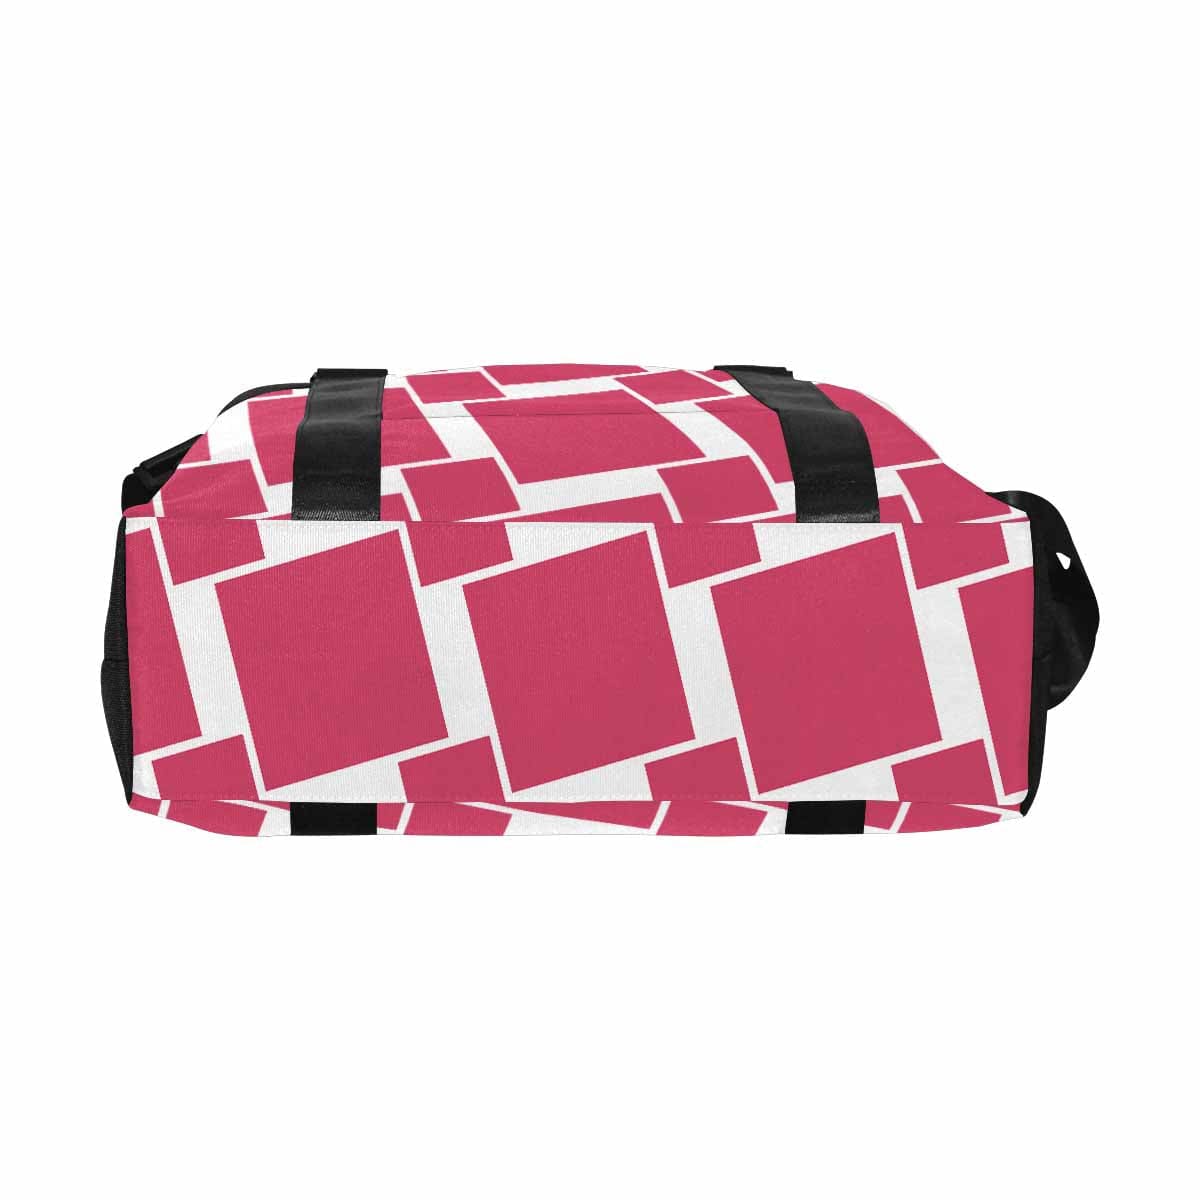 Duffle Bag - Large Capacity - Hot Pink - Bags | Travel Bags | Canvas Carry